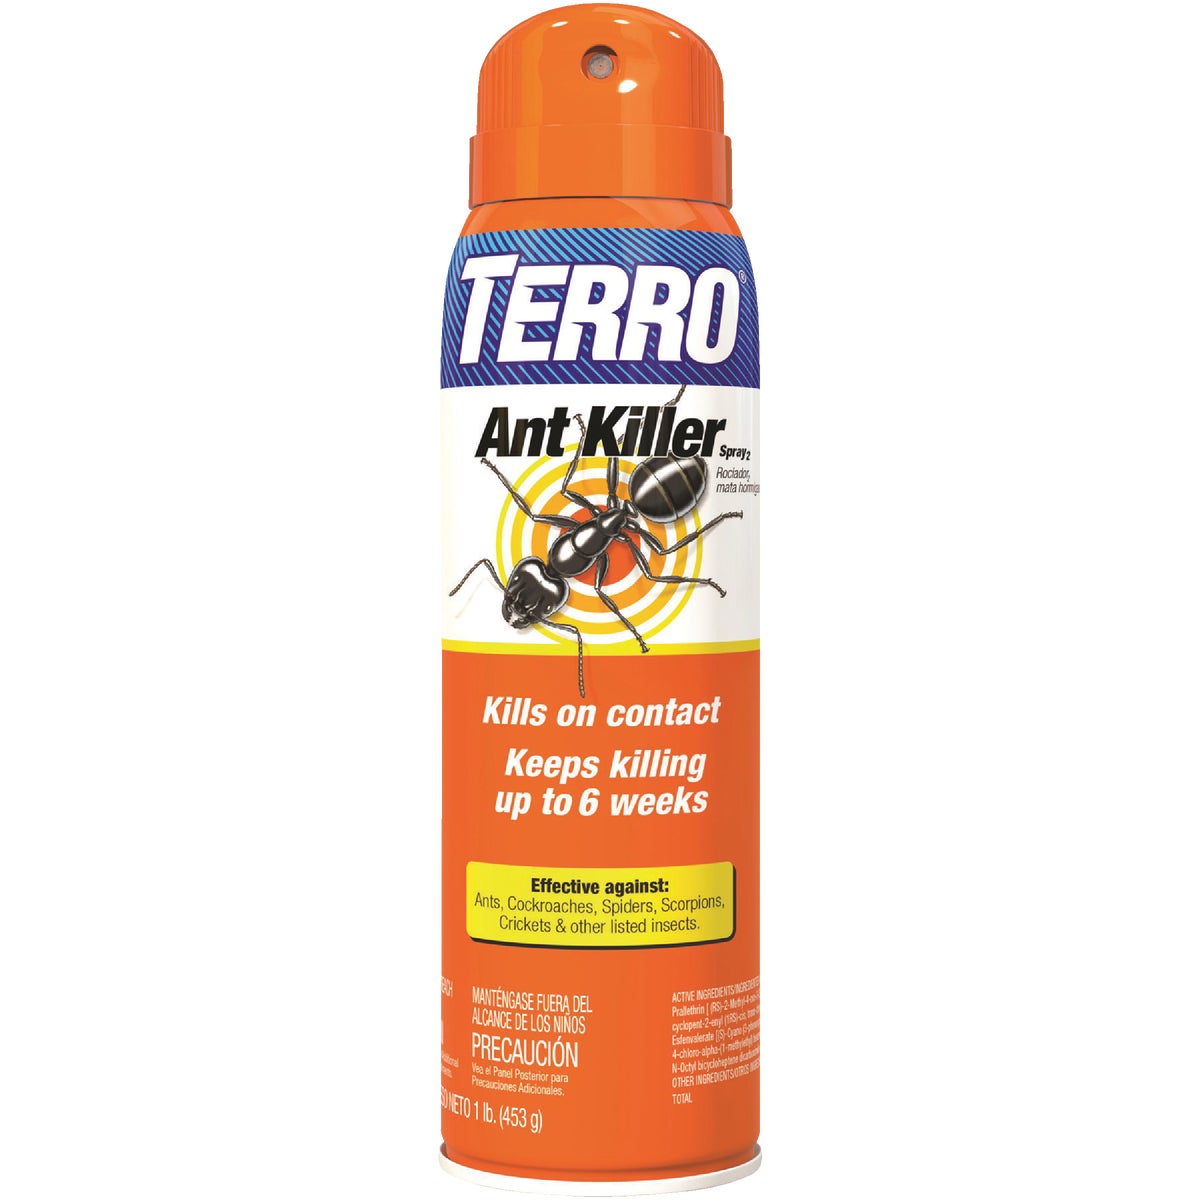 Item 765381, Long-lasting aerosol spray that kills on contact and continues to kill for 